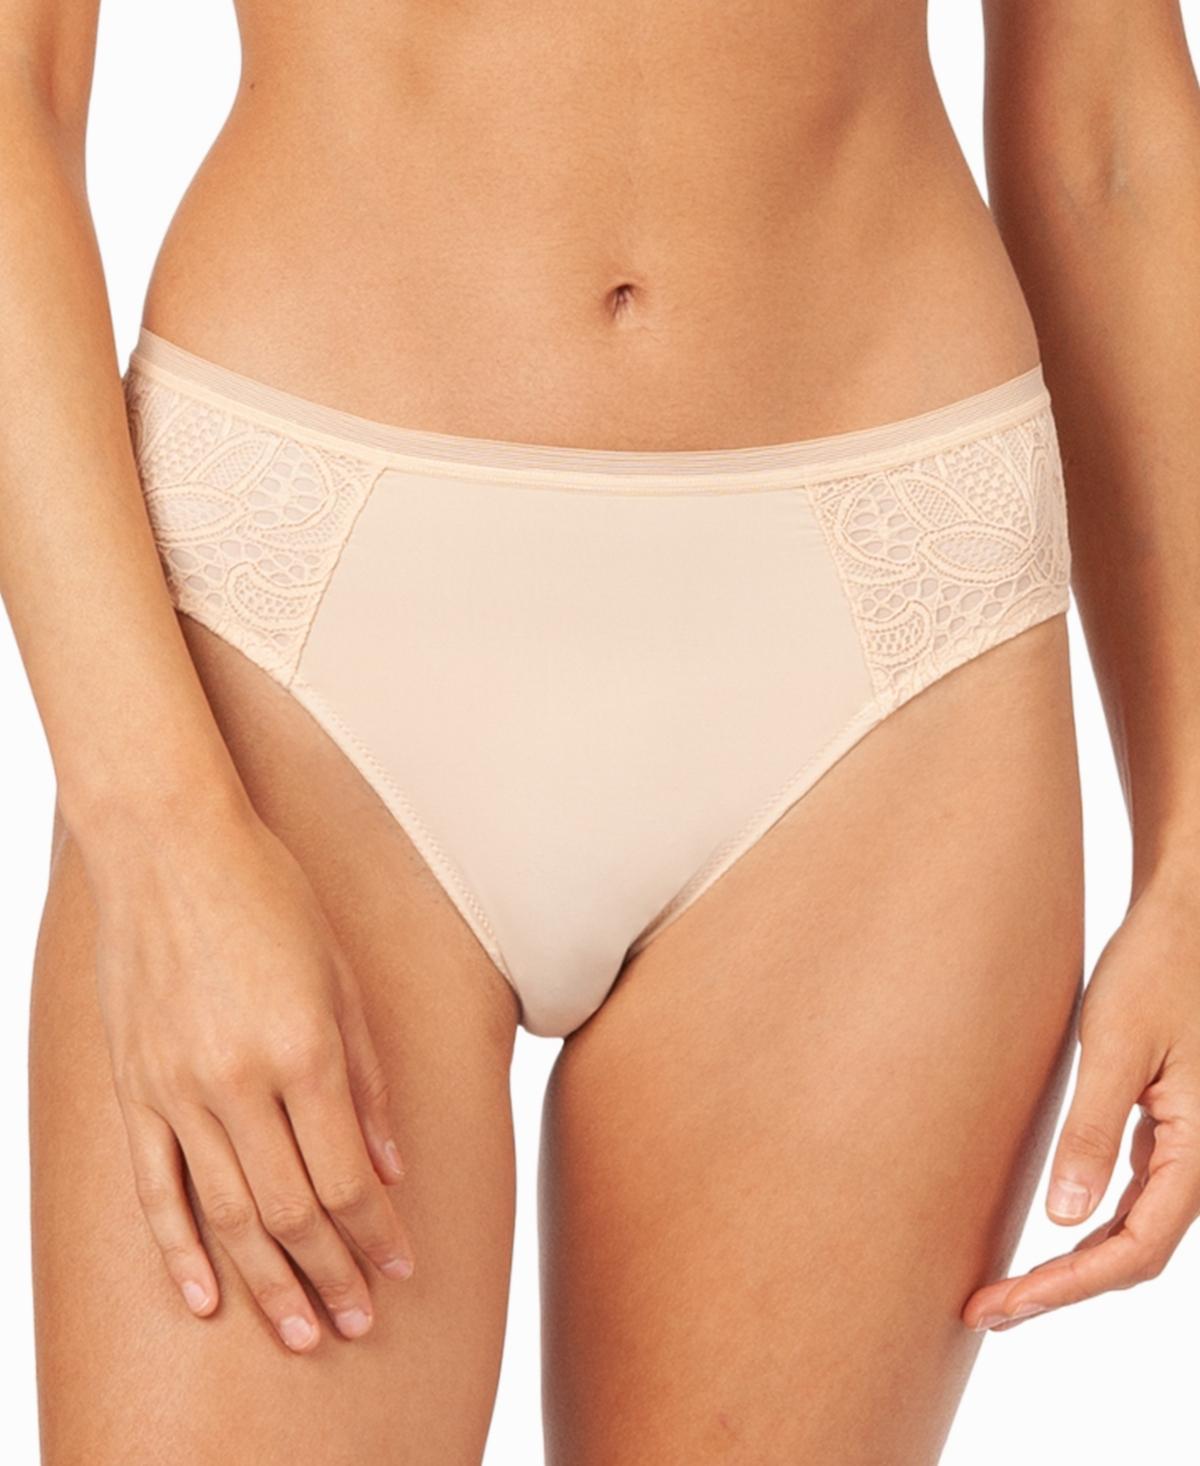 Lively The Lace High Waist Bikini Underwear in Natural